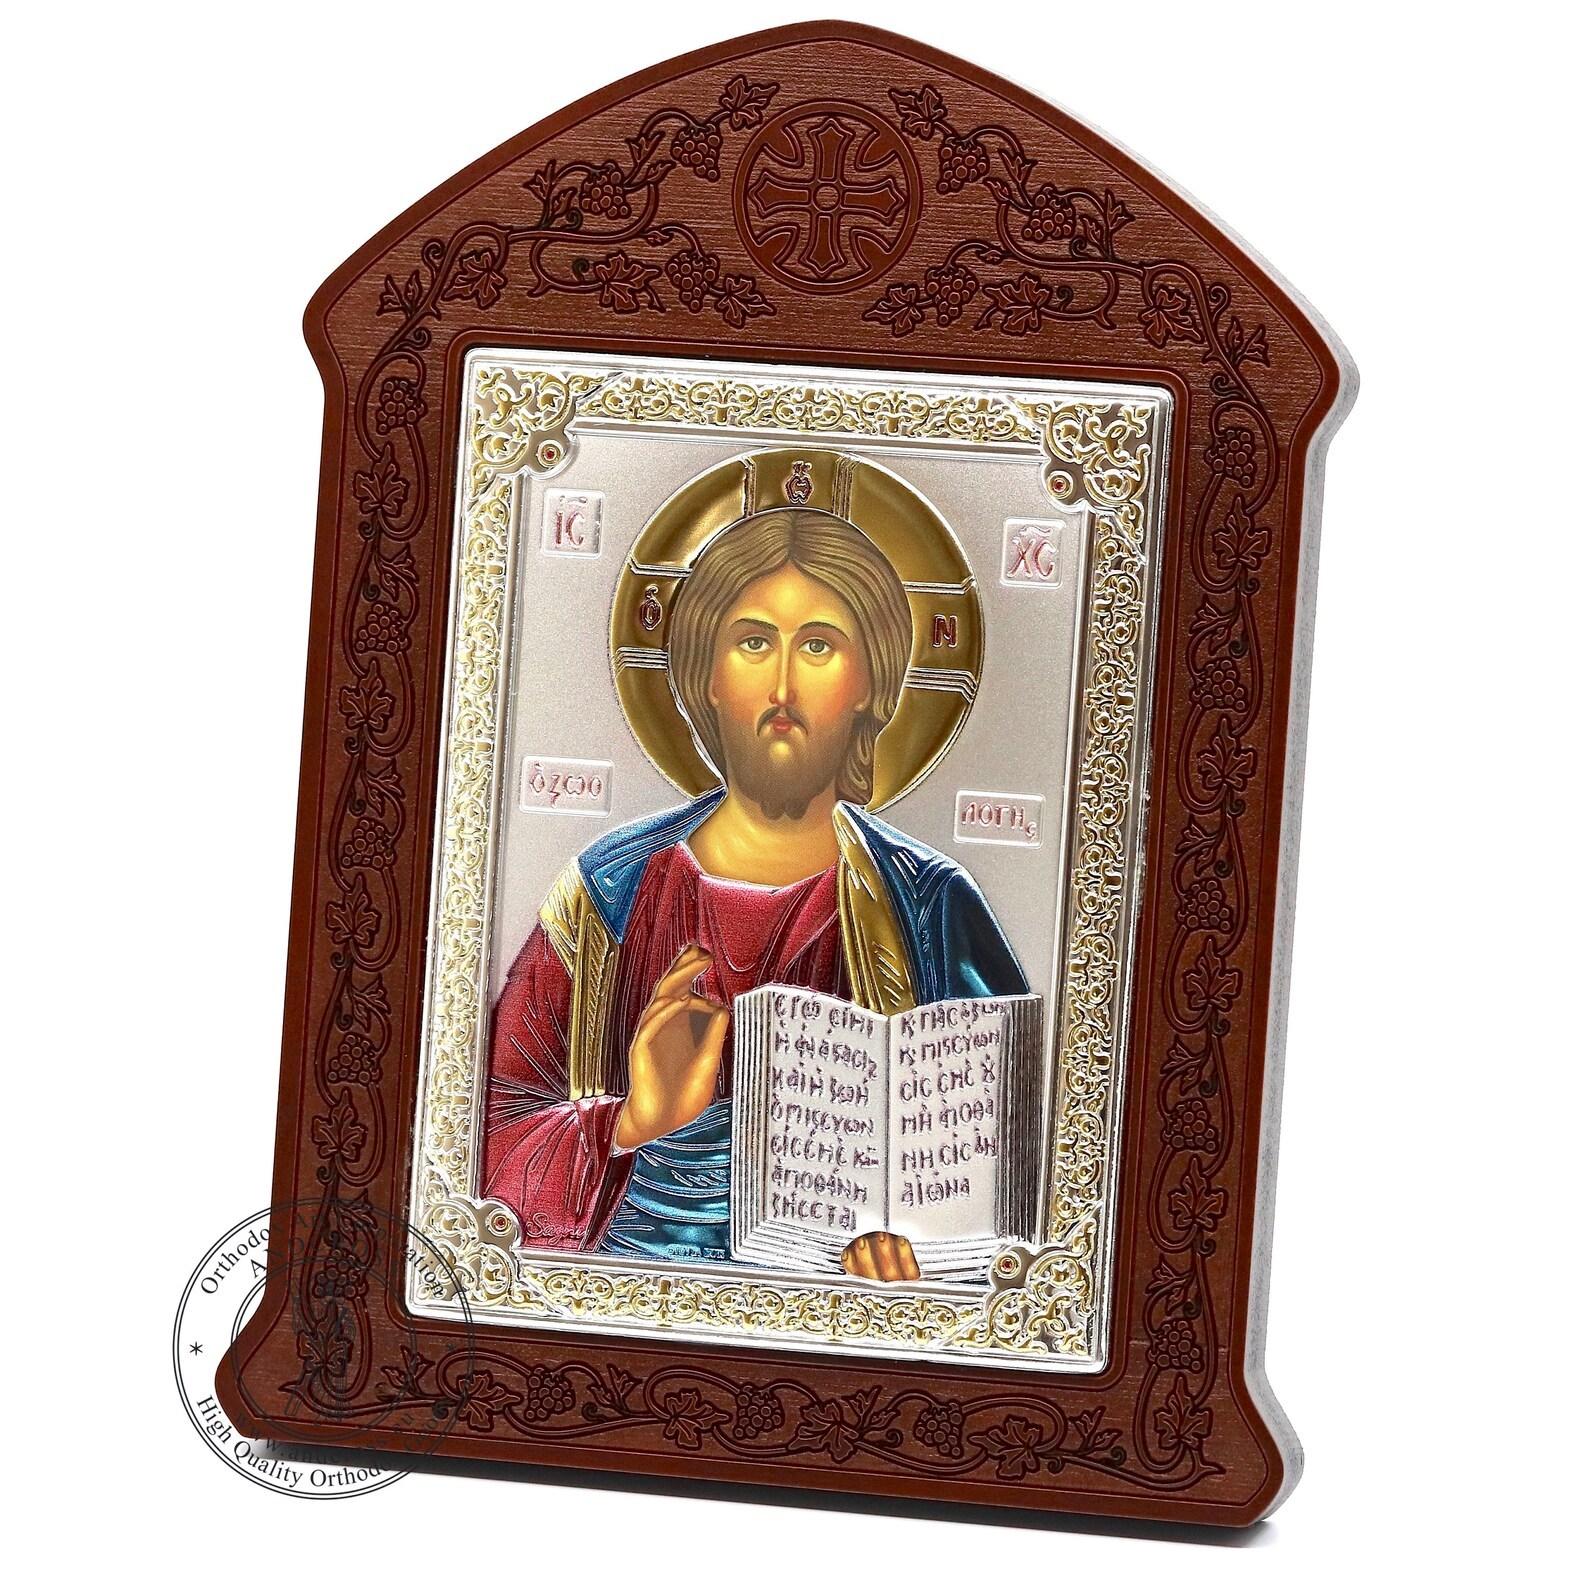 Lord Jesus Christ Pantocrator Wooden Framed Orthodox Icon Plated .999 Oklad Riza ( 6.5″ X 4.9″ ) 16.5cm X 12.5cm. B487|Lord Jesus Christ Pantocrator Wooden Framed Orthodox Icon Plated .999 Oklad Riza ( 6.5″ X 4.9″ ) 16.5cm X 12.5cm. B487|Lord Jesus Christ Pantocrator Wooden Framed Orthodox Icon Plated .999 Oklad Riza ( 6.5″ X 4.9″ ) 16.5cm X 12.5cm. B487|Lord Jesus Christ Pantocrator Wooden Framed Orthodox Icon Plated .999 Oklad Riza ( 6.5″ X 4.9″ ) 16.5cm X 12.5cm. B487|Lord Jesus Christ Pantocrator Wooden Framed Orthodox Icon Plated .999 Oklad Riza ( 6.5″ X 4.9″ ) 16.5cm X 12.5cm. B487|Lord Jesus Christ Pantocrator Wooden Framed Orthodox Icon Plated .999 Oklad Riza ( 6.5″ X 4.9″ ) 16.5cm X 12.5cm. B487|Lord Jesus Christ Pantocrator Wooden Framed Orthodox Icon Plated .999 Oklad Riza ( 6.5″ X 4.9″ ) 16.5cm X 12.5cm. B487